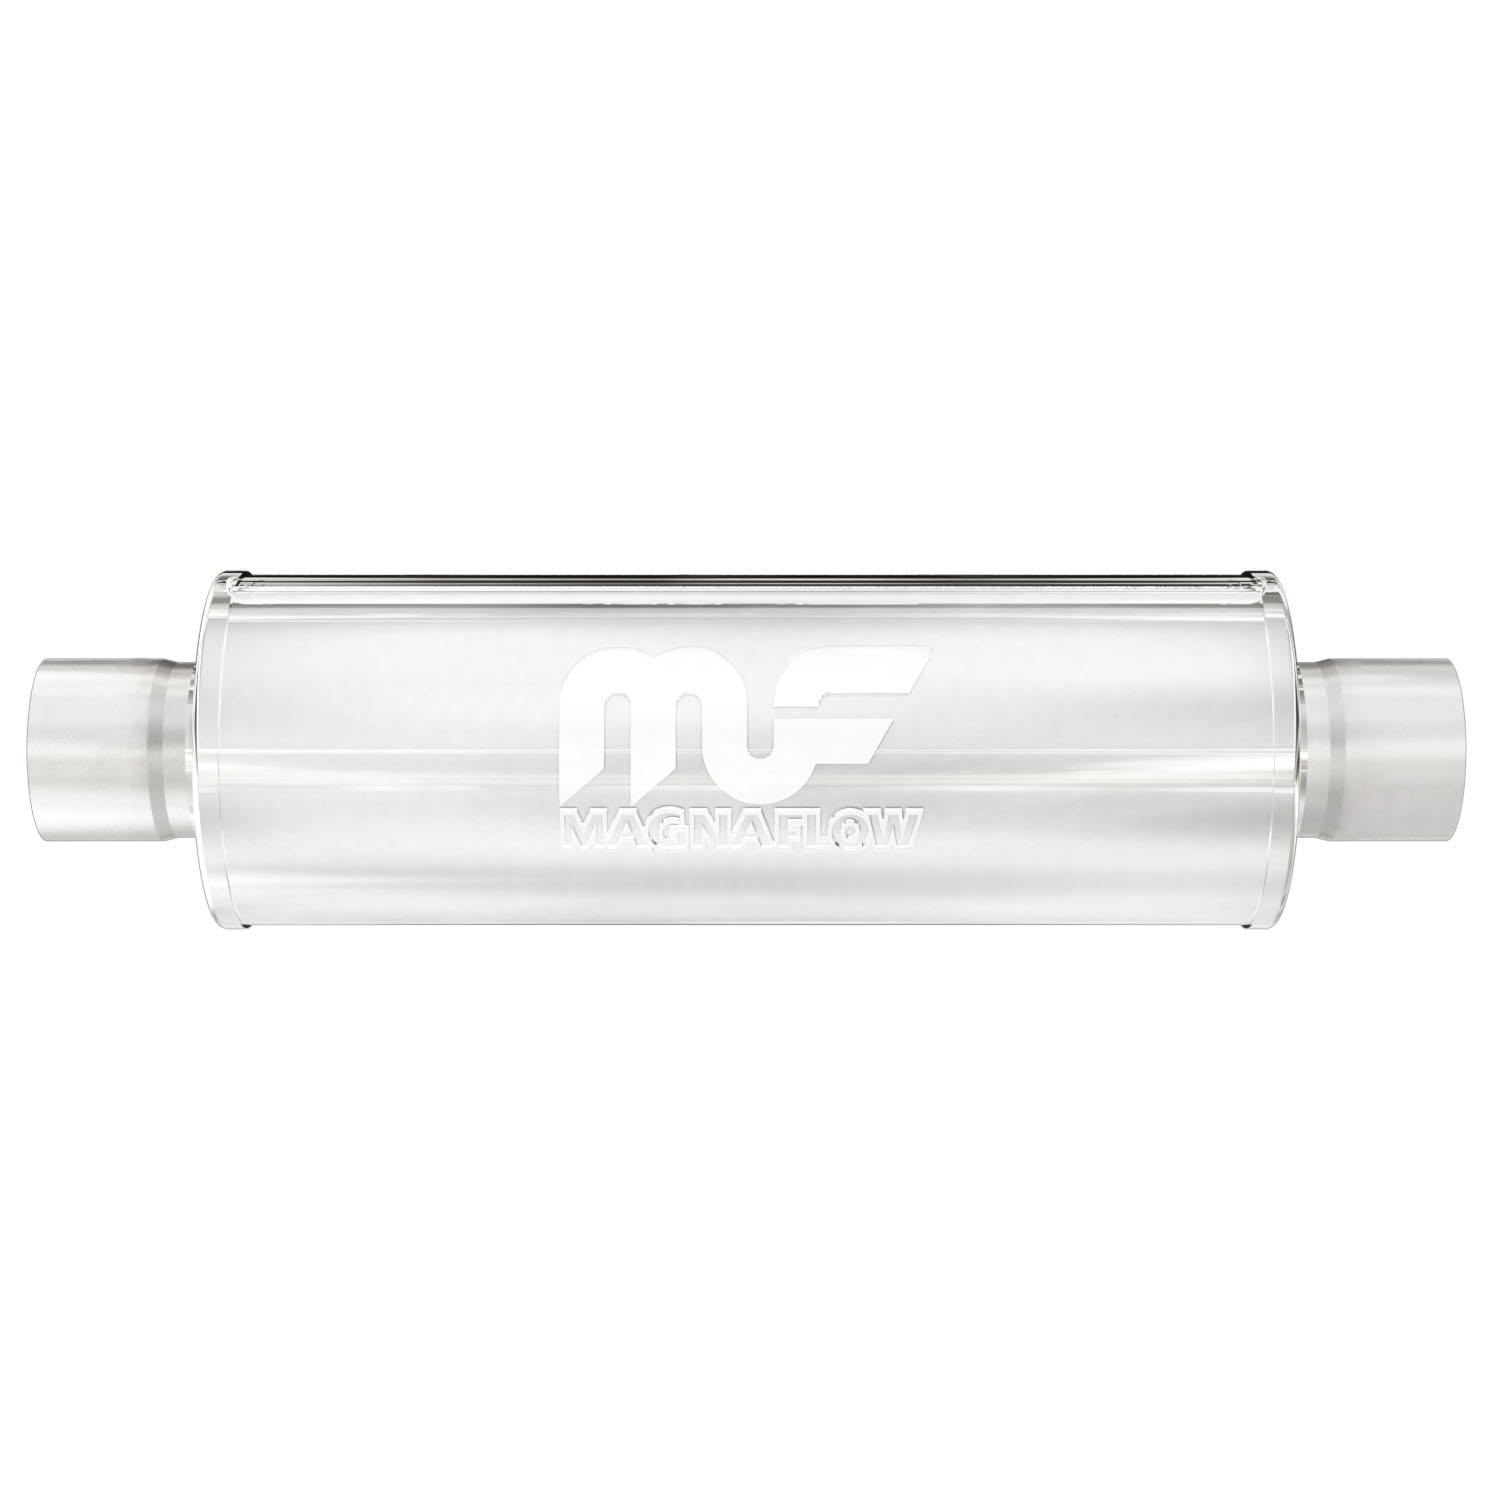 6" Round Muffler Center In/Center Out: 2.25" Body Length: 14" Overall Length: 20" Core Size: 2.5" Polished Finish